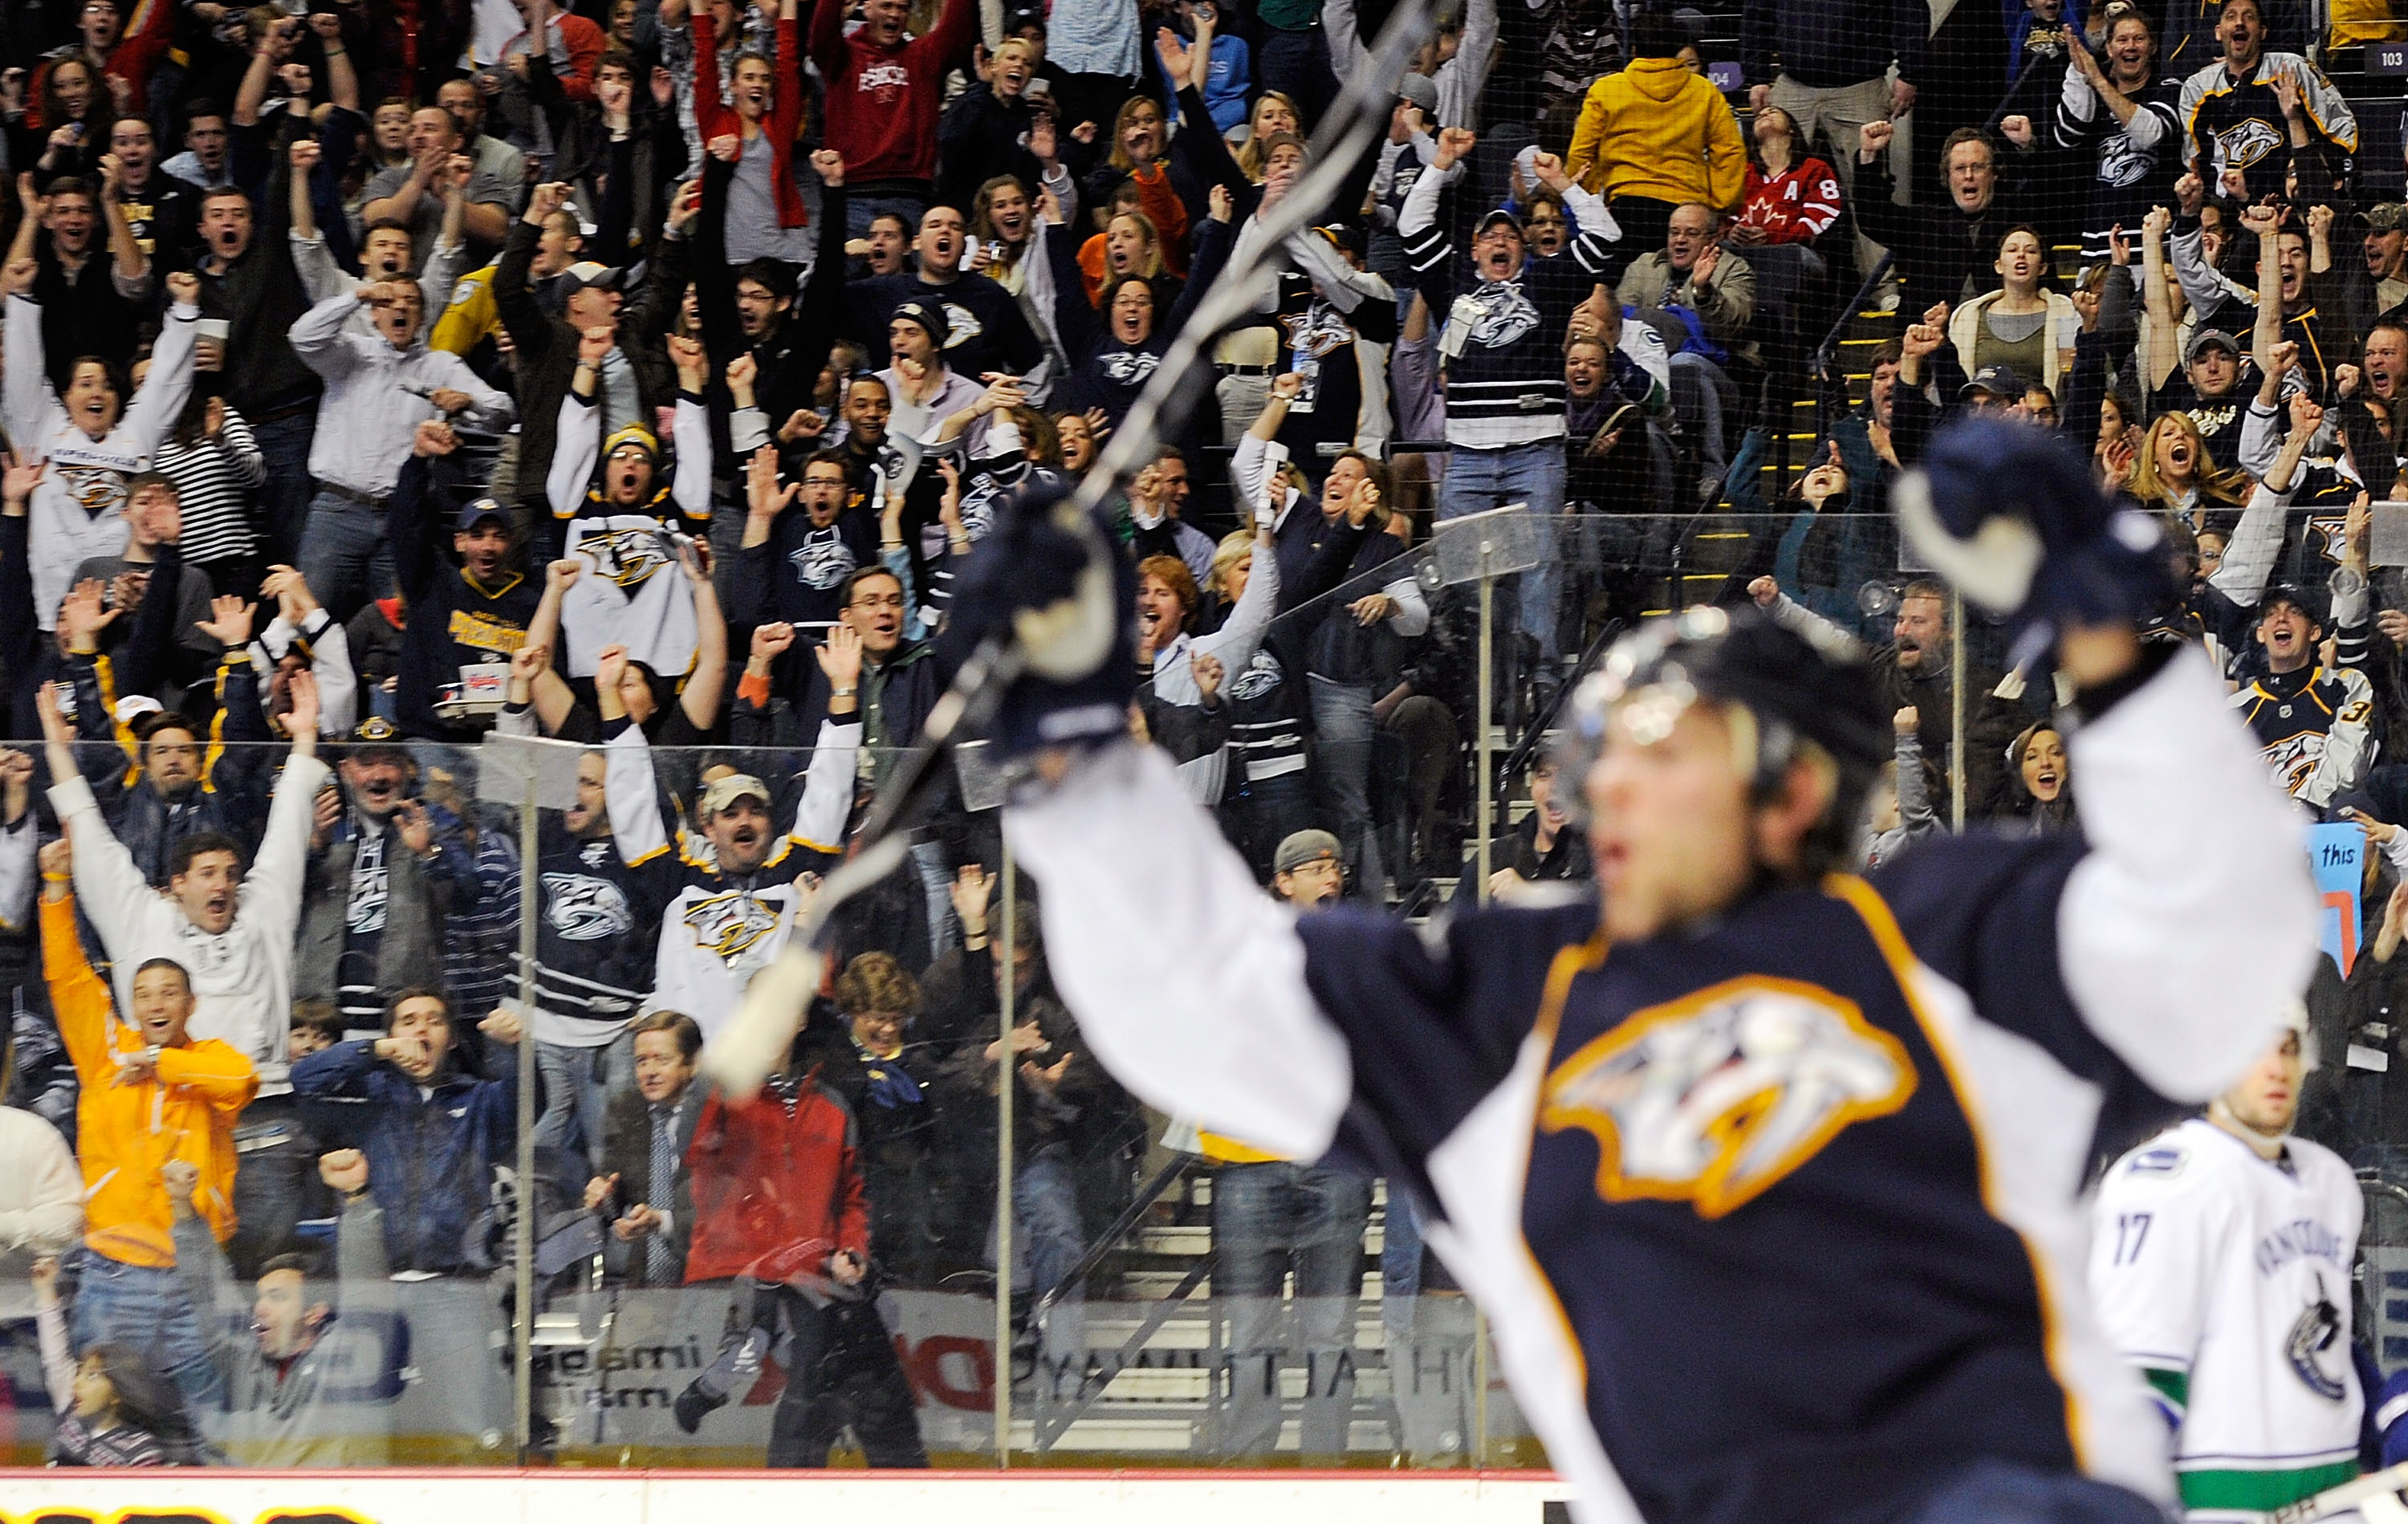 NASHVILLE, TN - FEBRUARY 17:  Fans celebrate after a goal is scored by Mike Fisher of the Nashville Predators on February 17, 2011 at the Bridgestone Arena in Nashville, Tennessee.  (Photo by Frederick Breedon/Getty Images)